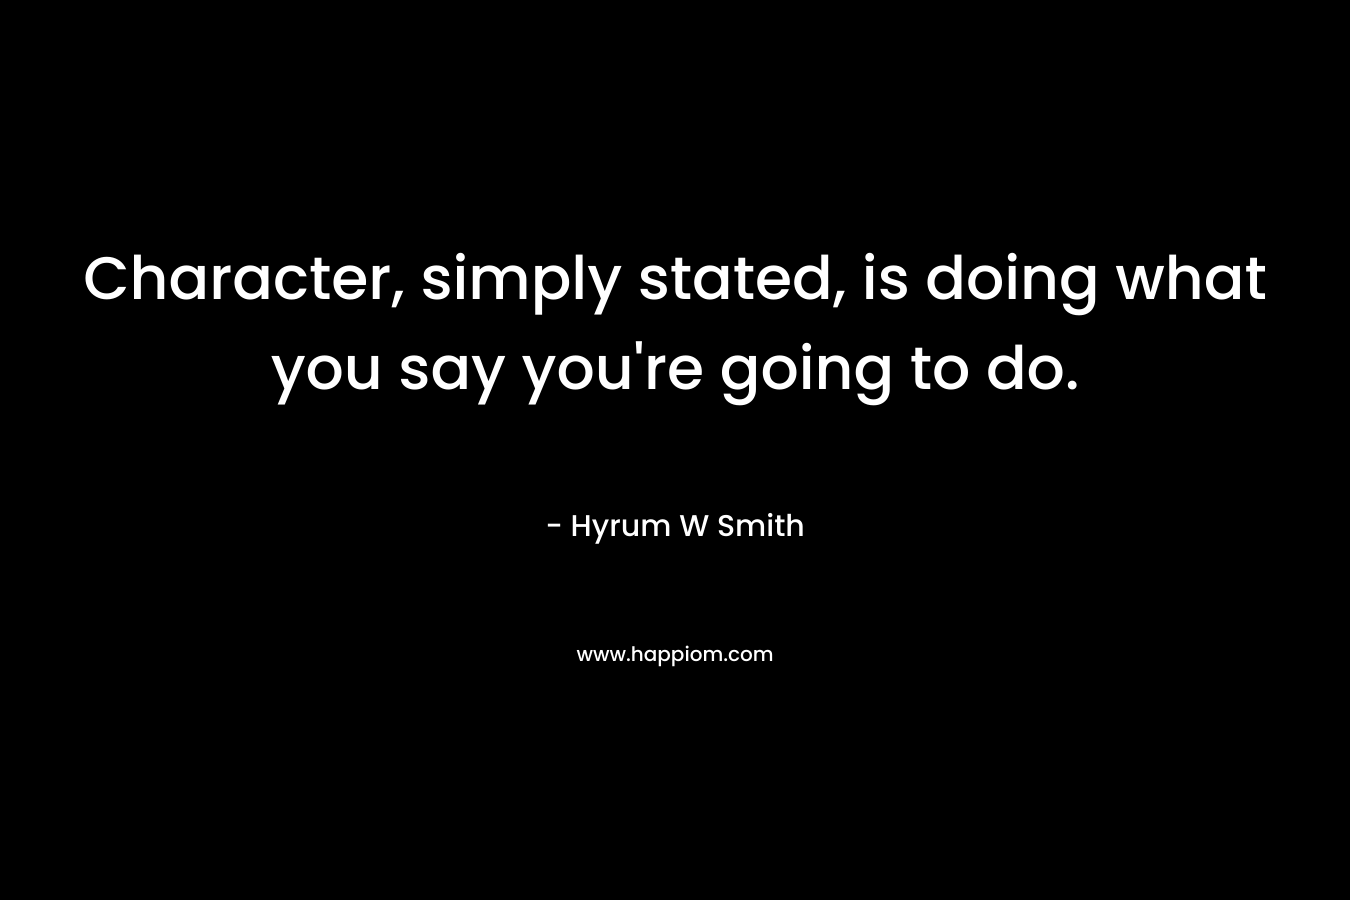 Character, simply stated, is doing what you say you’re going to do. – Hyrum W Smith